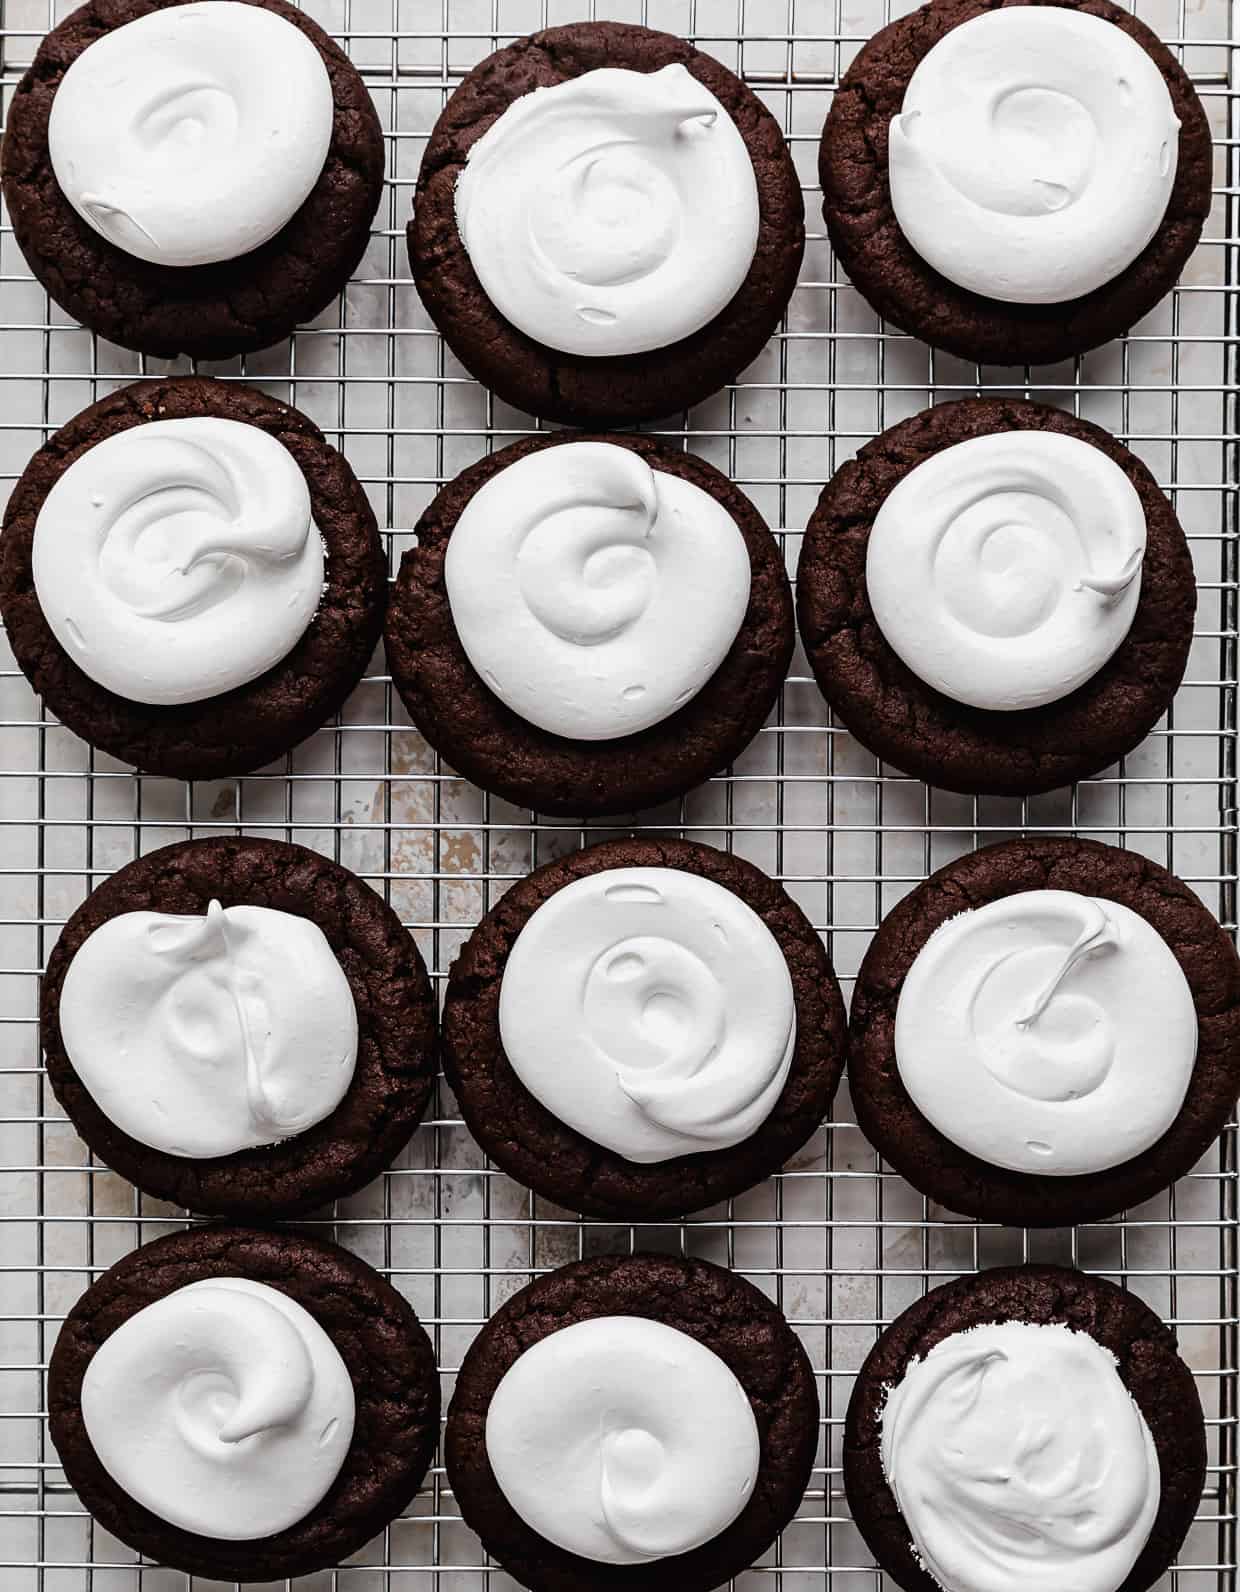 Marshmallow frosting topped chocolate cookies.